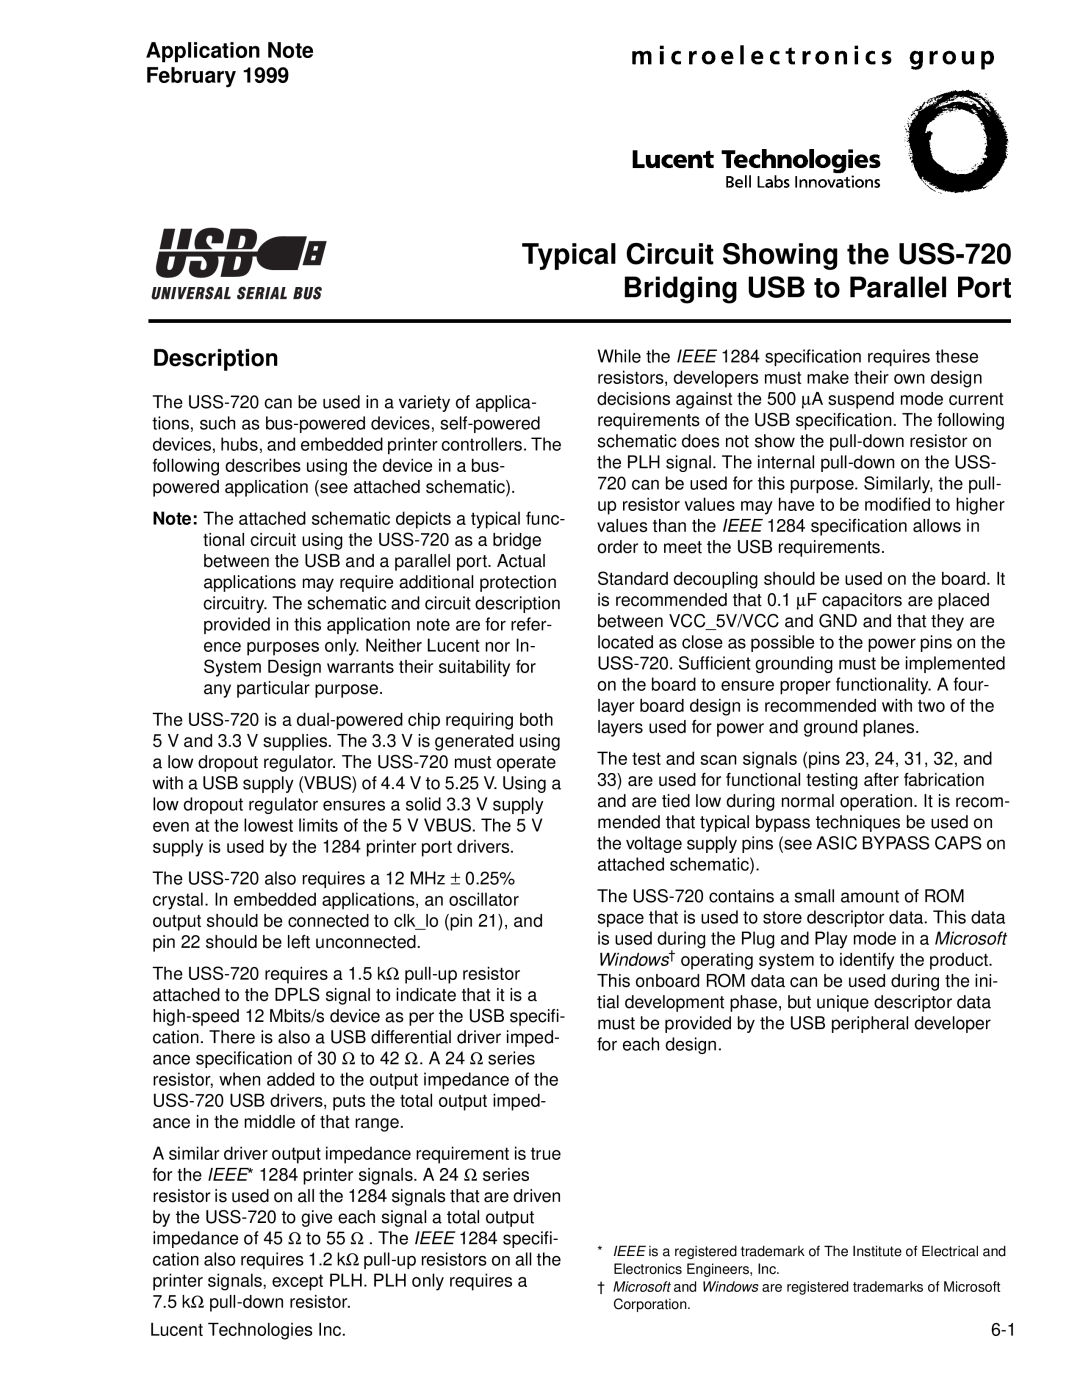 Lucent Technologies manual Typical Circuit Showing the USS-720 Bridging USB to Parallel Port, Application Note February 